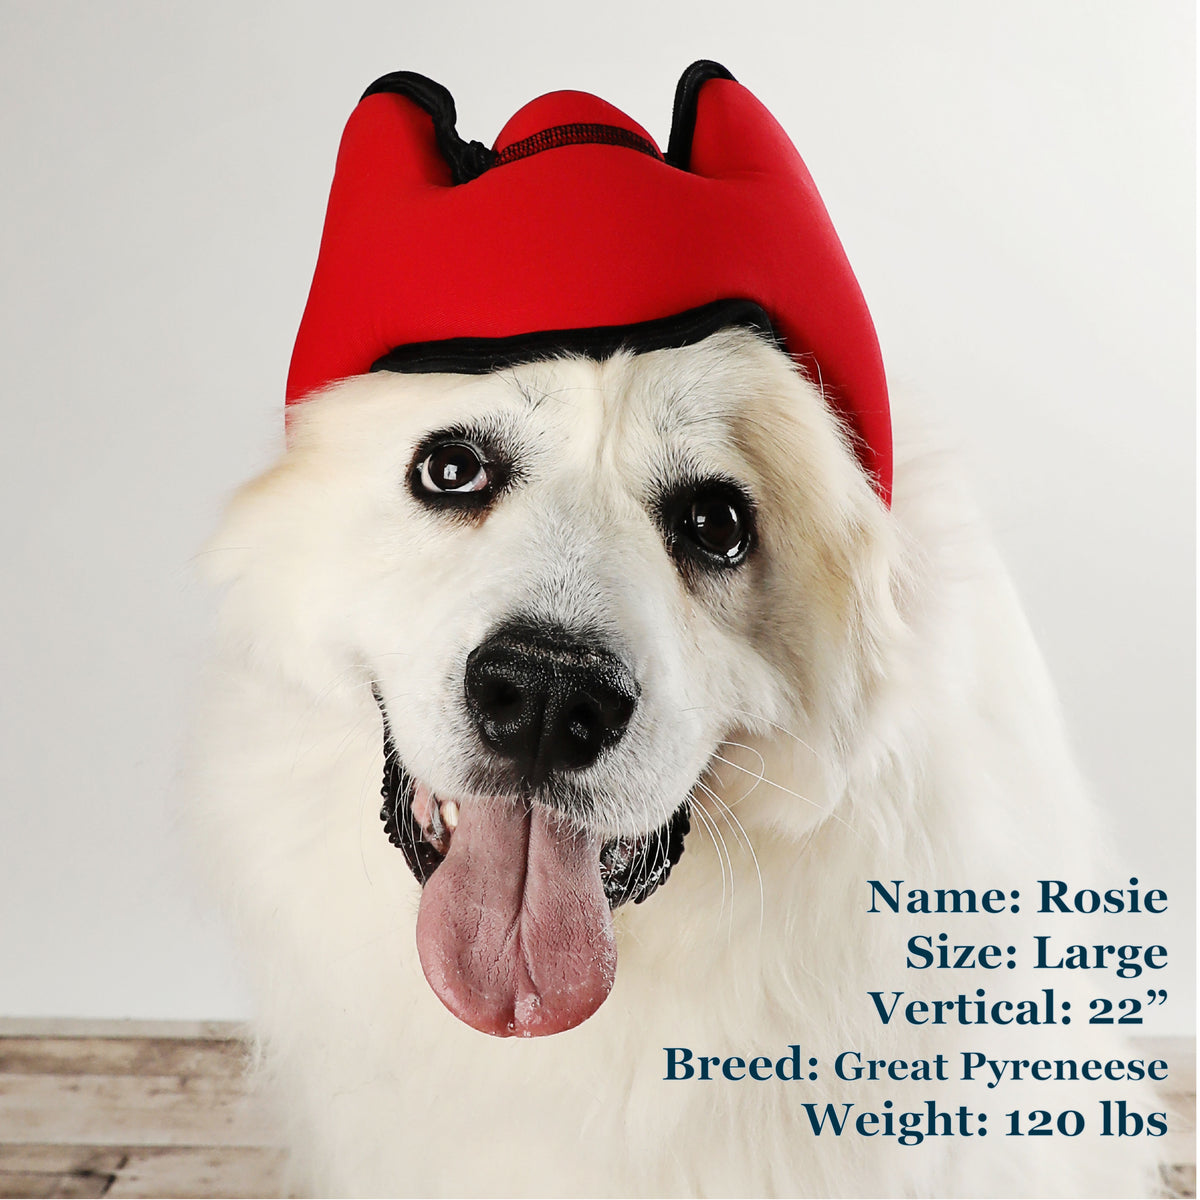 Rosie is a Pyreneese in a Large Red PAWNIX Noise Cancelling Headset for dogs